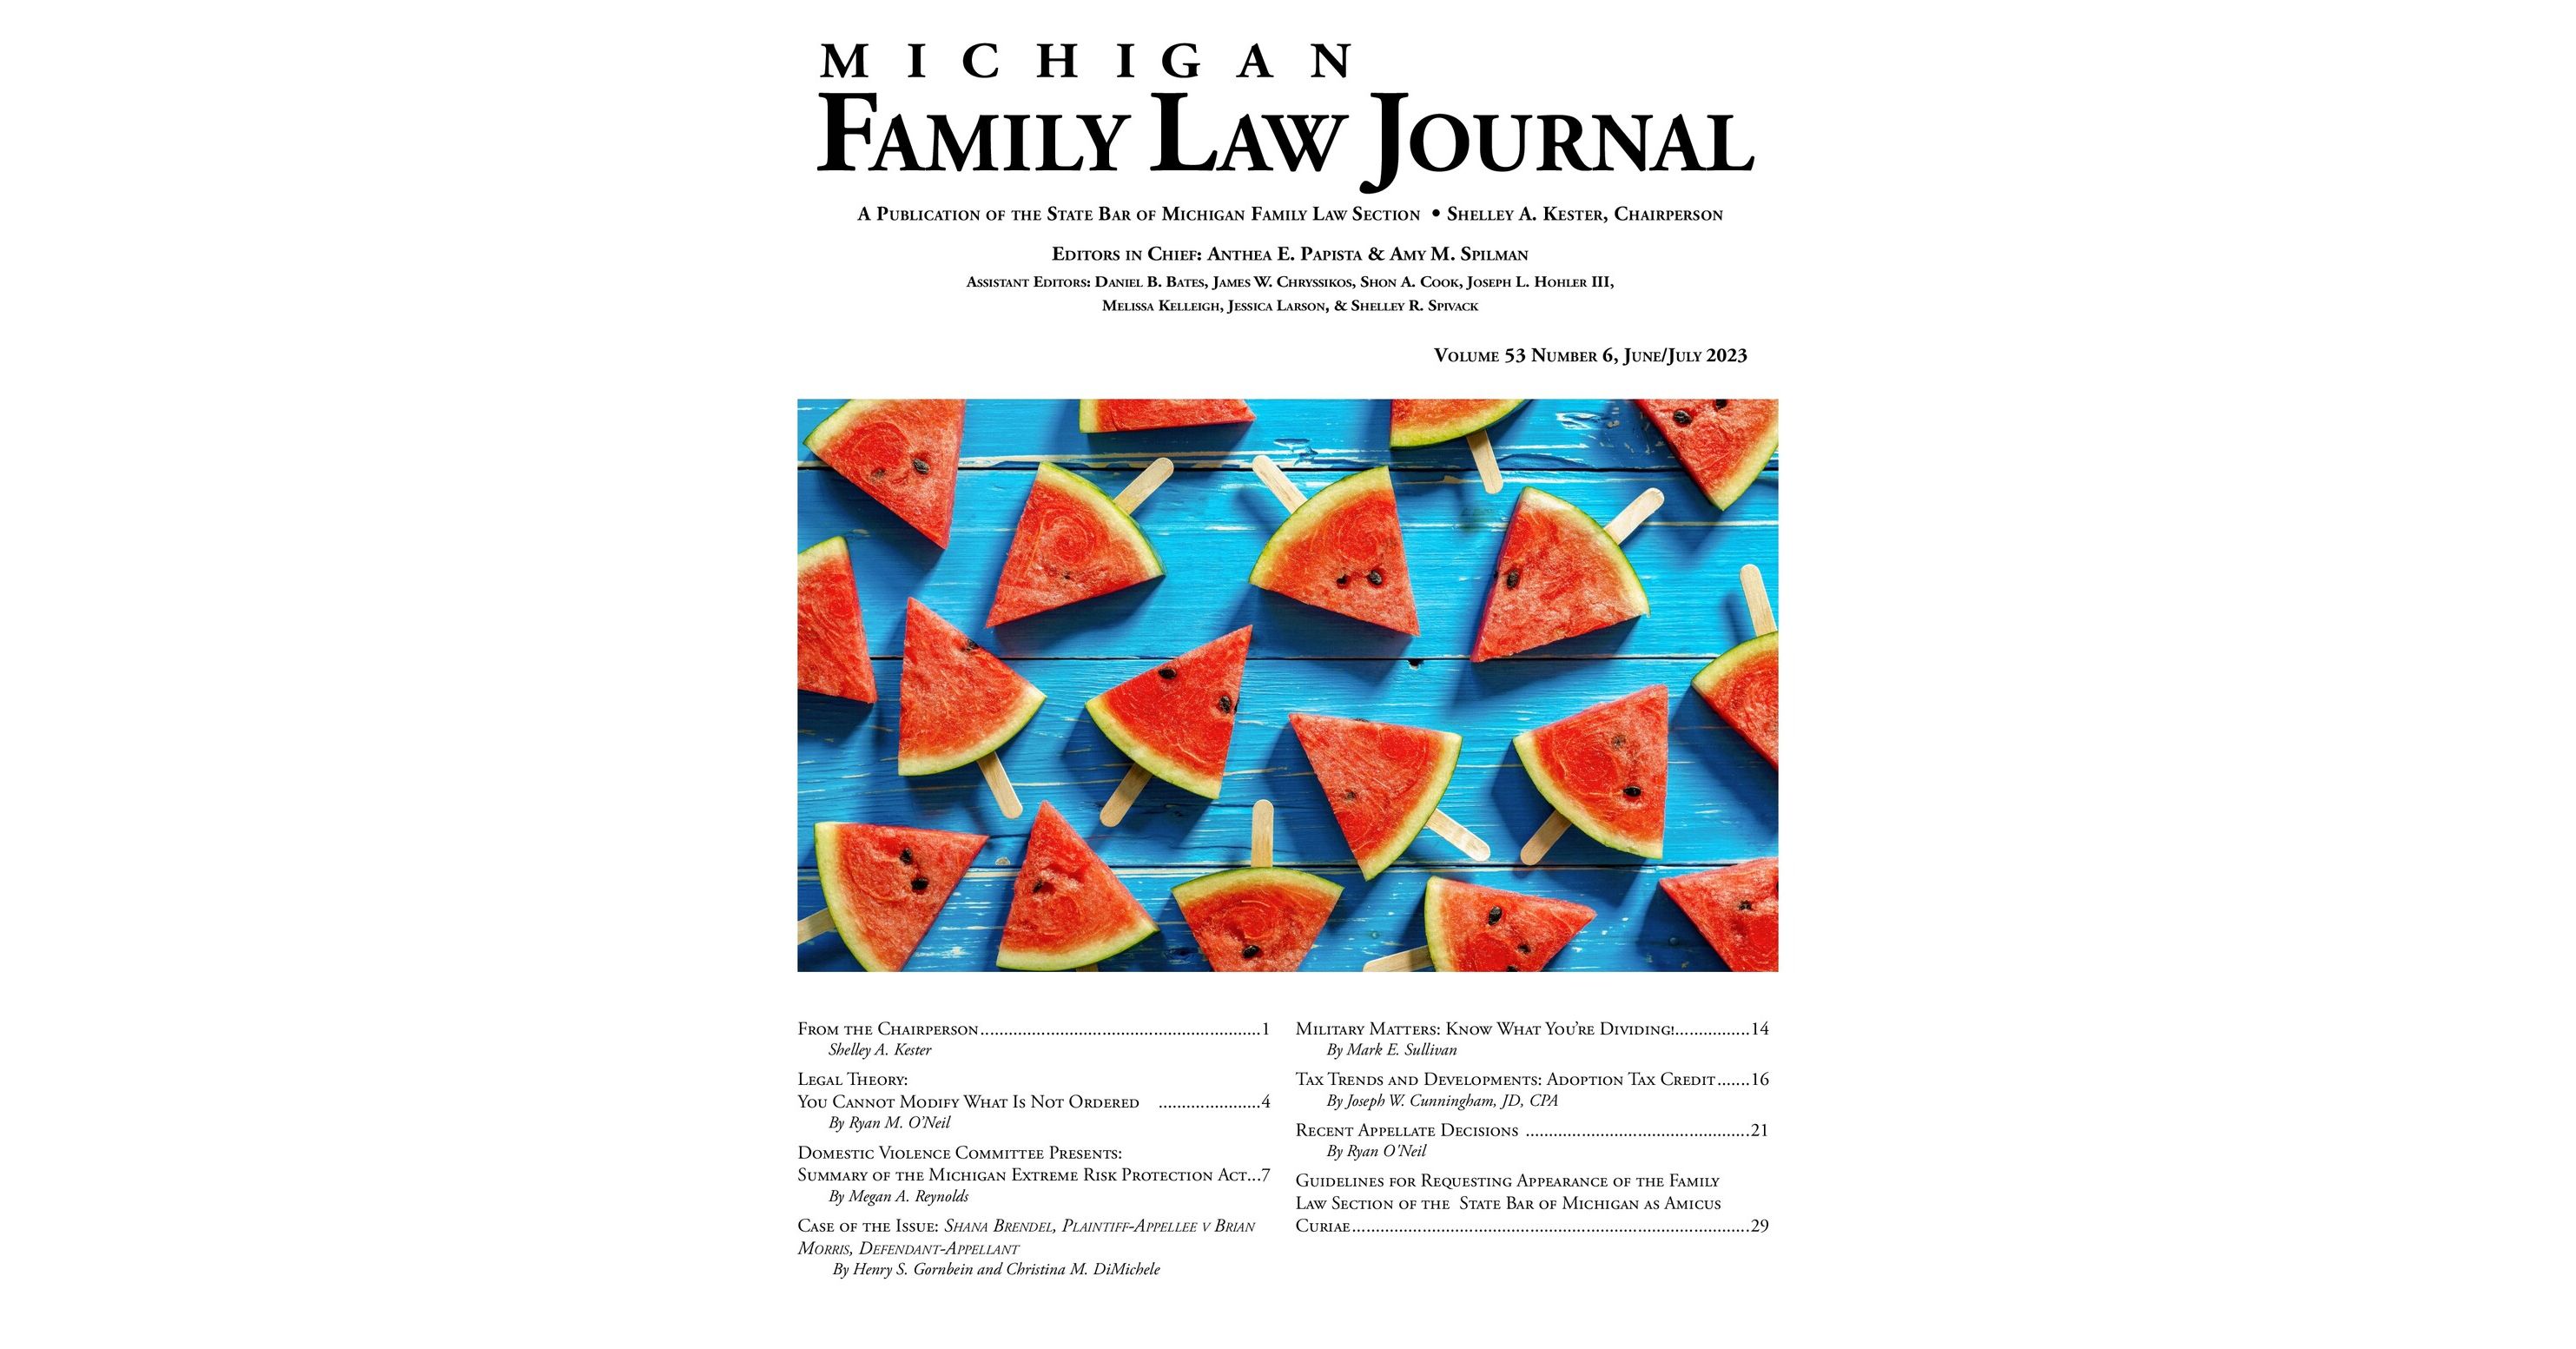 Michigan Family Law Journal June/July 2023